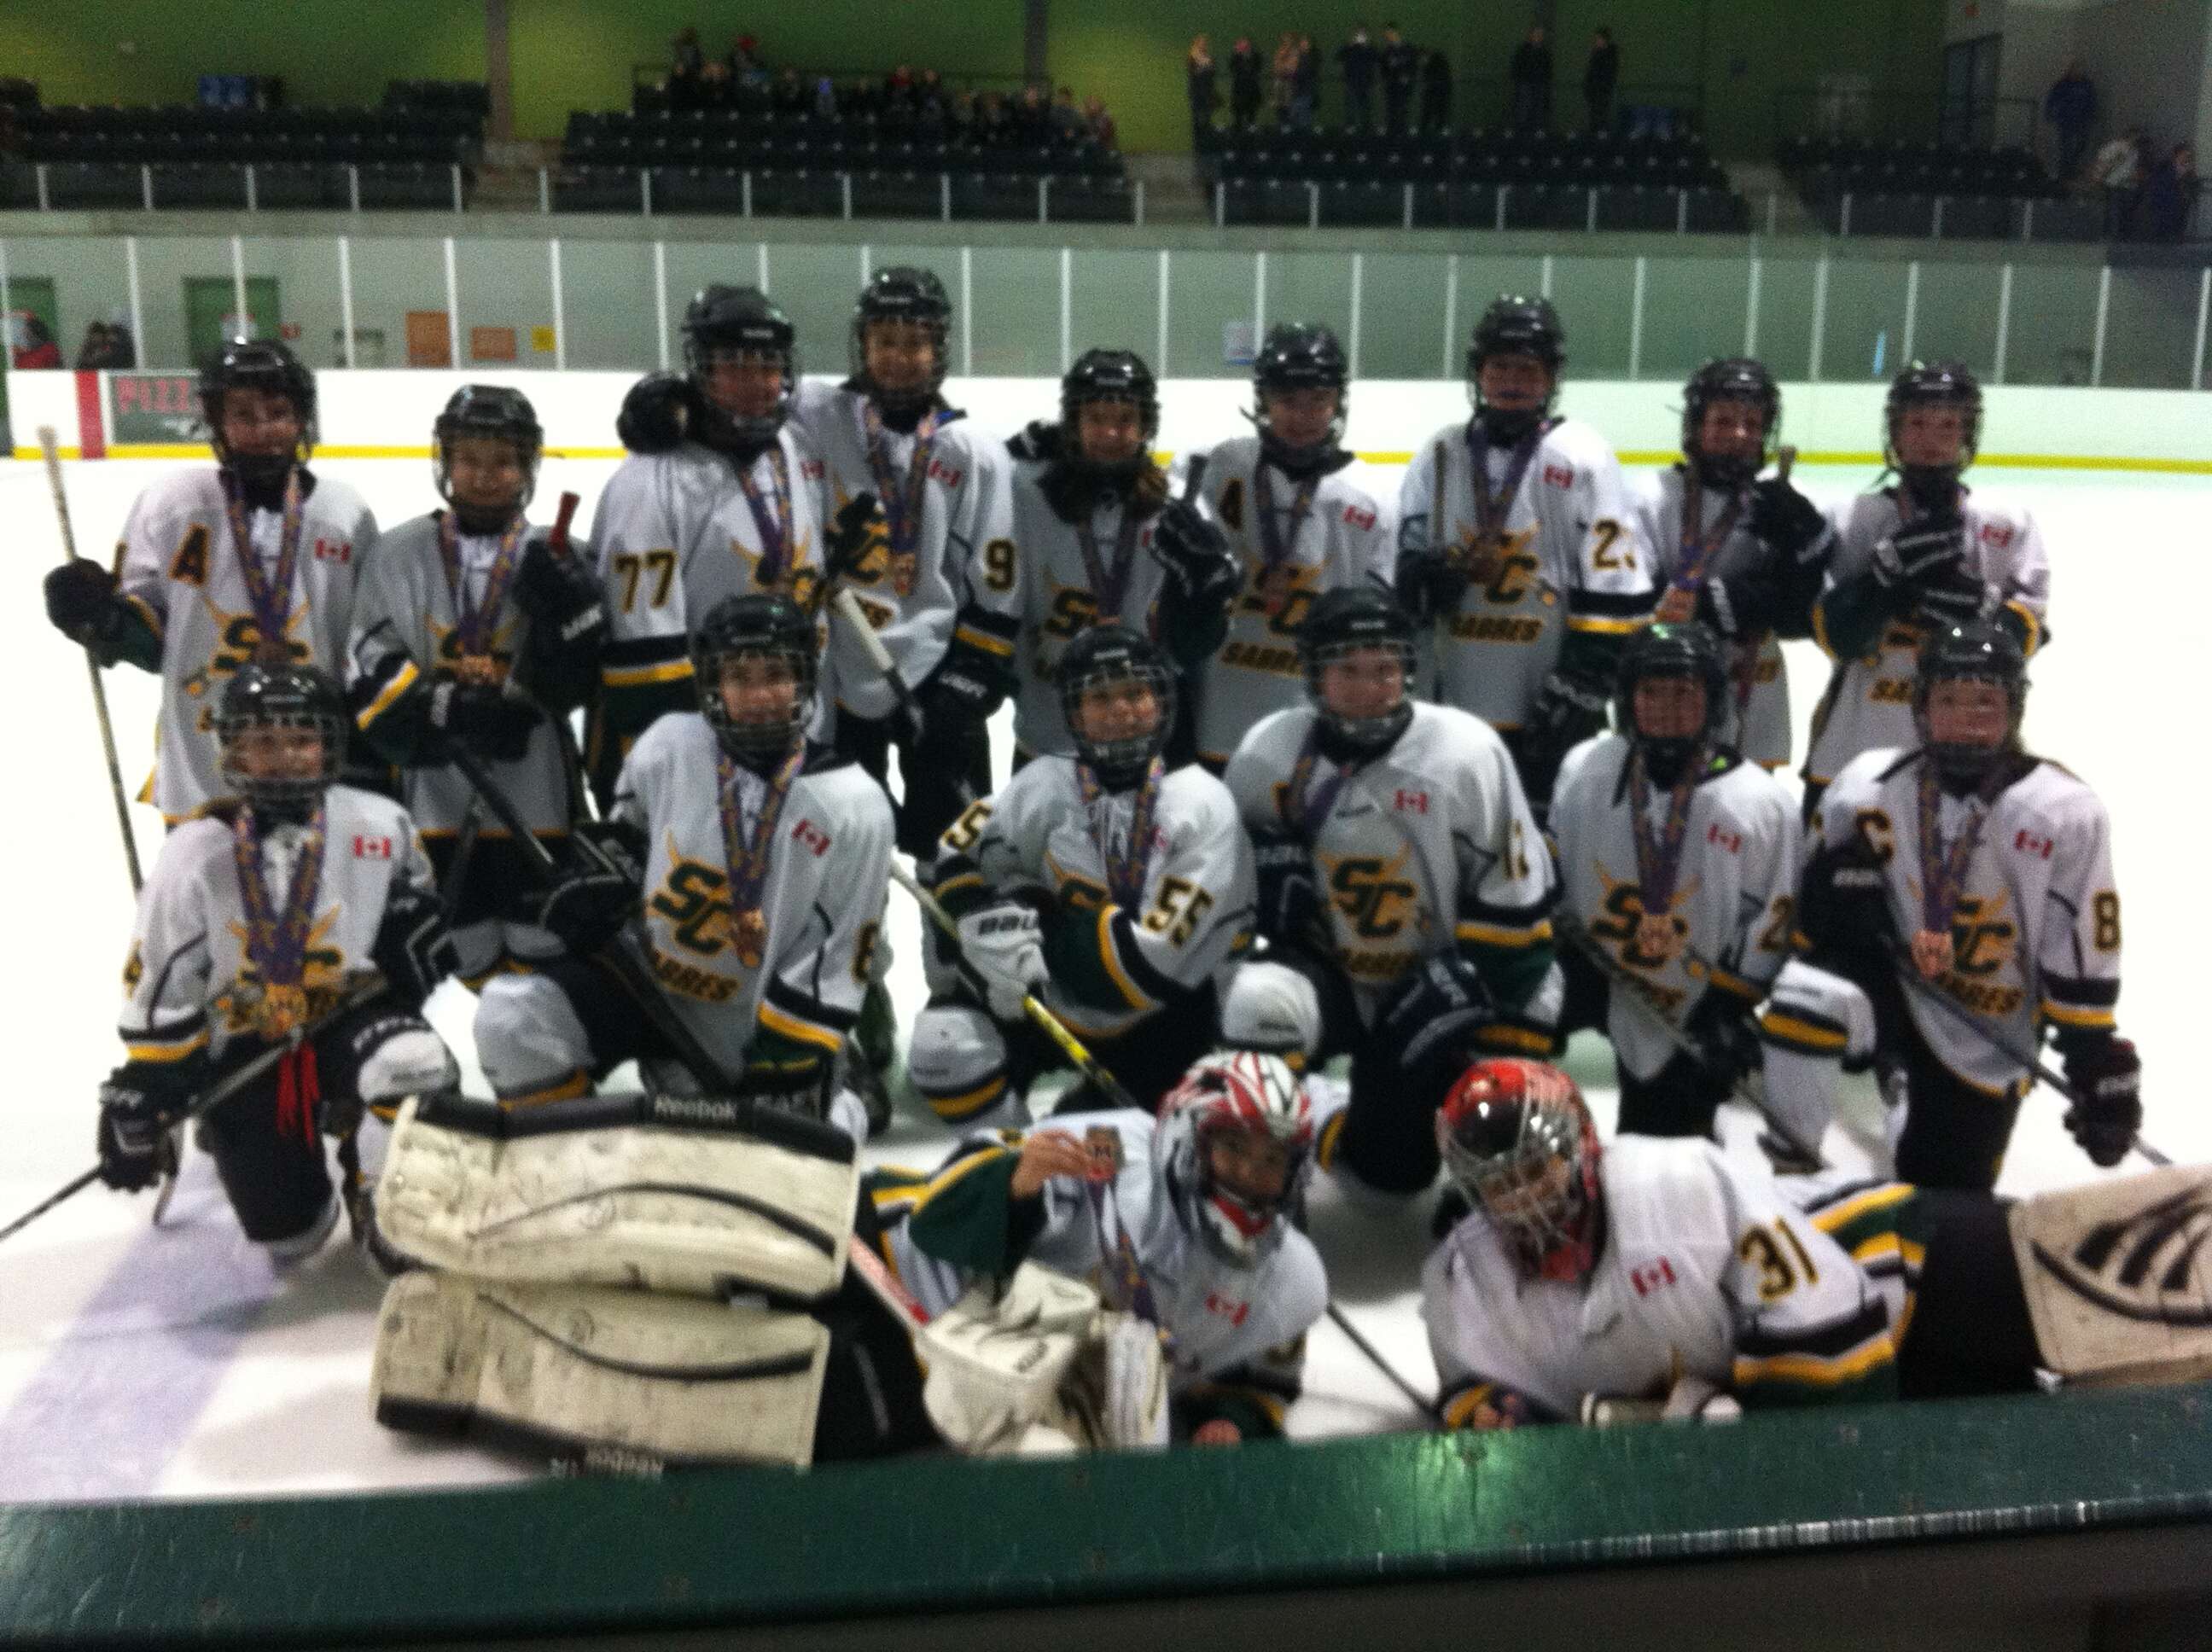 Peewee A - Mississauga - Bronze Medalists